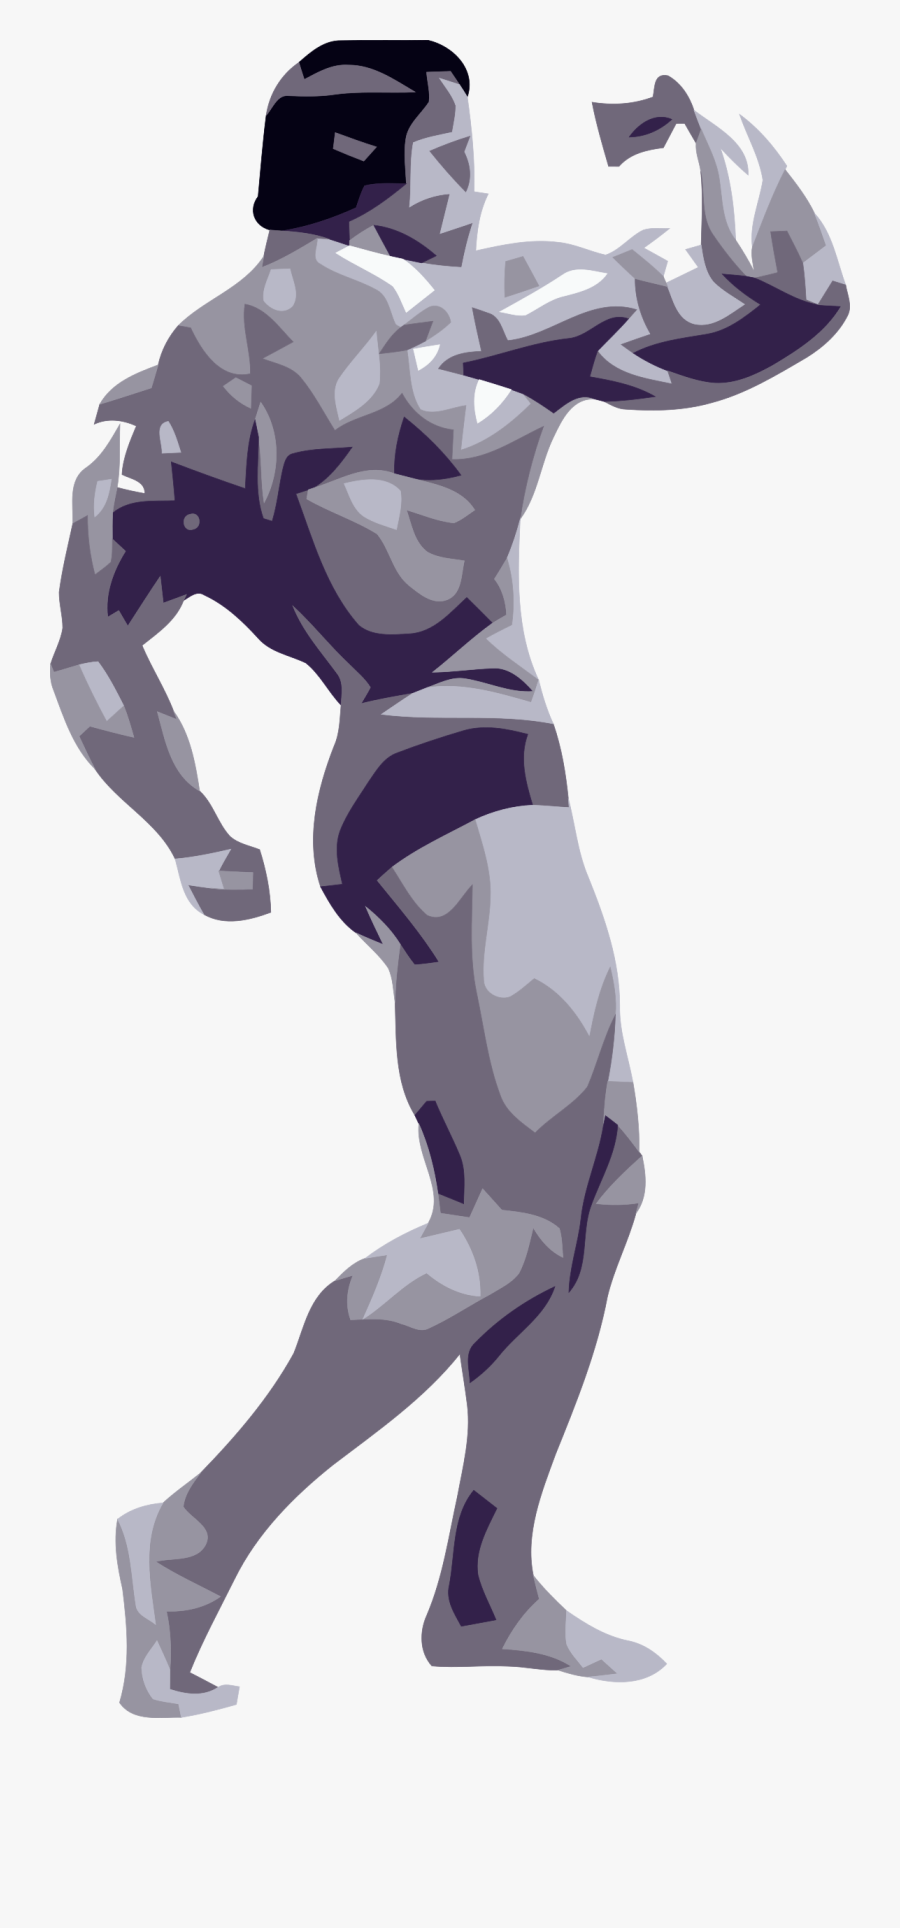 Posing Bodybuilder - Weight Gain Dxn Products, Transparent Clipart